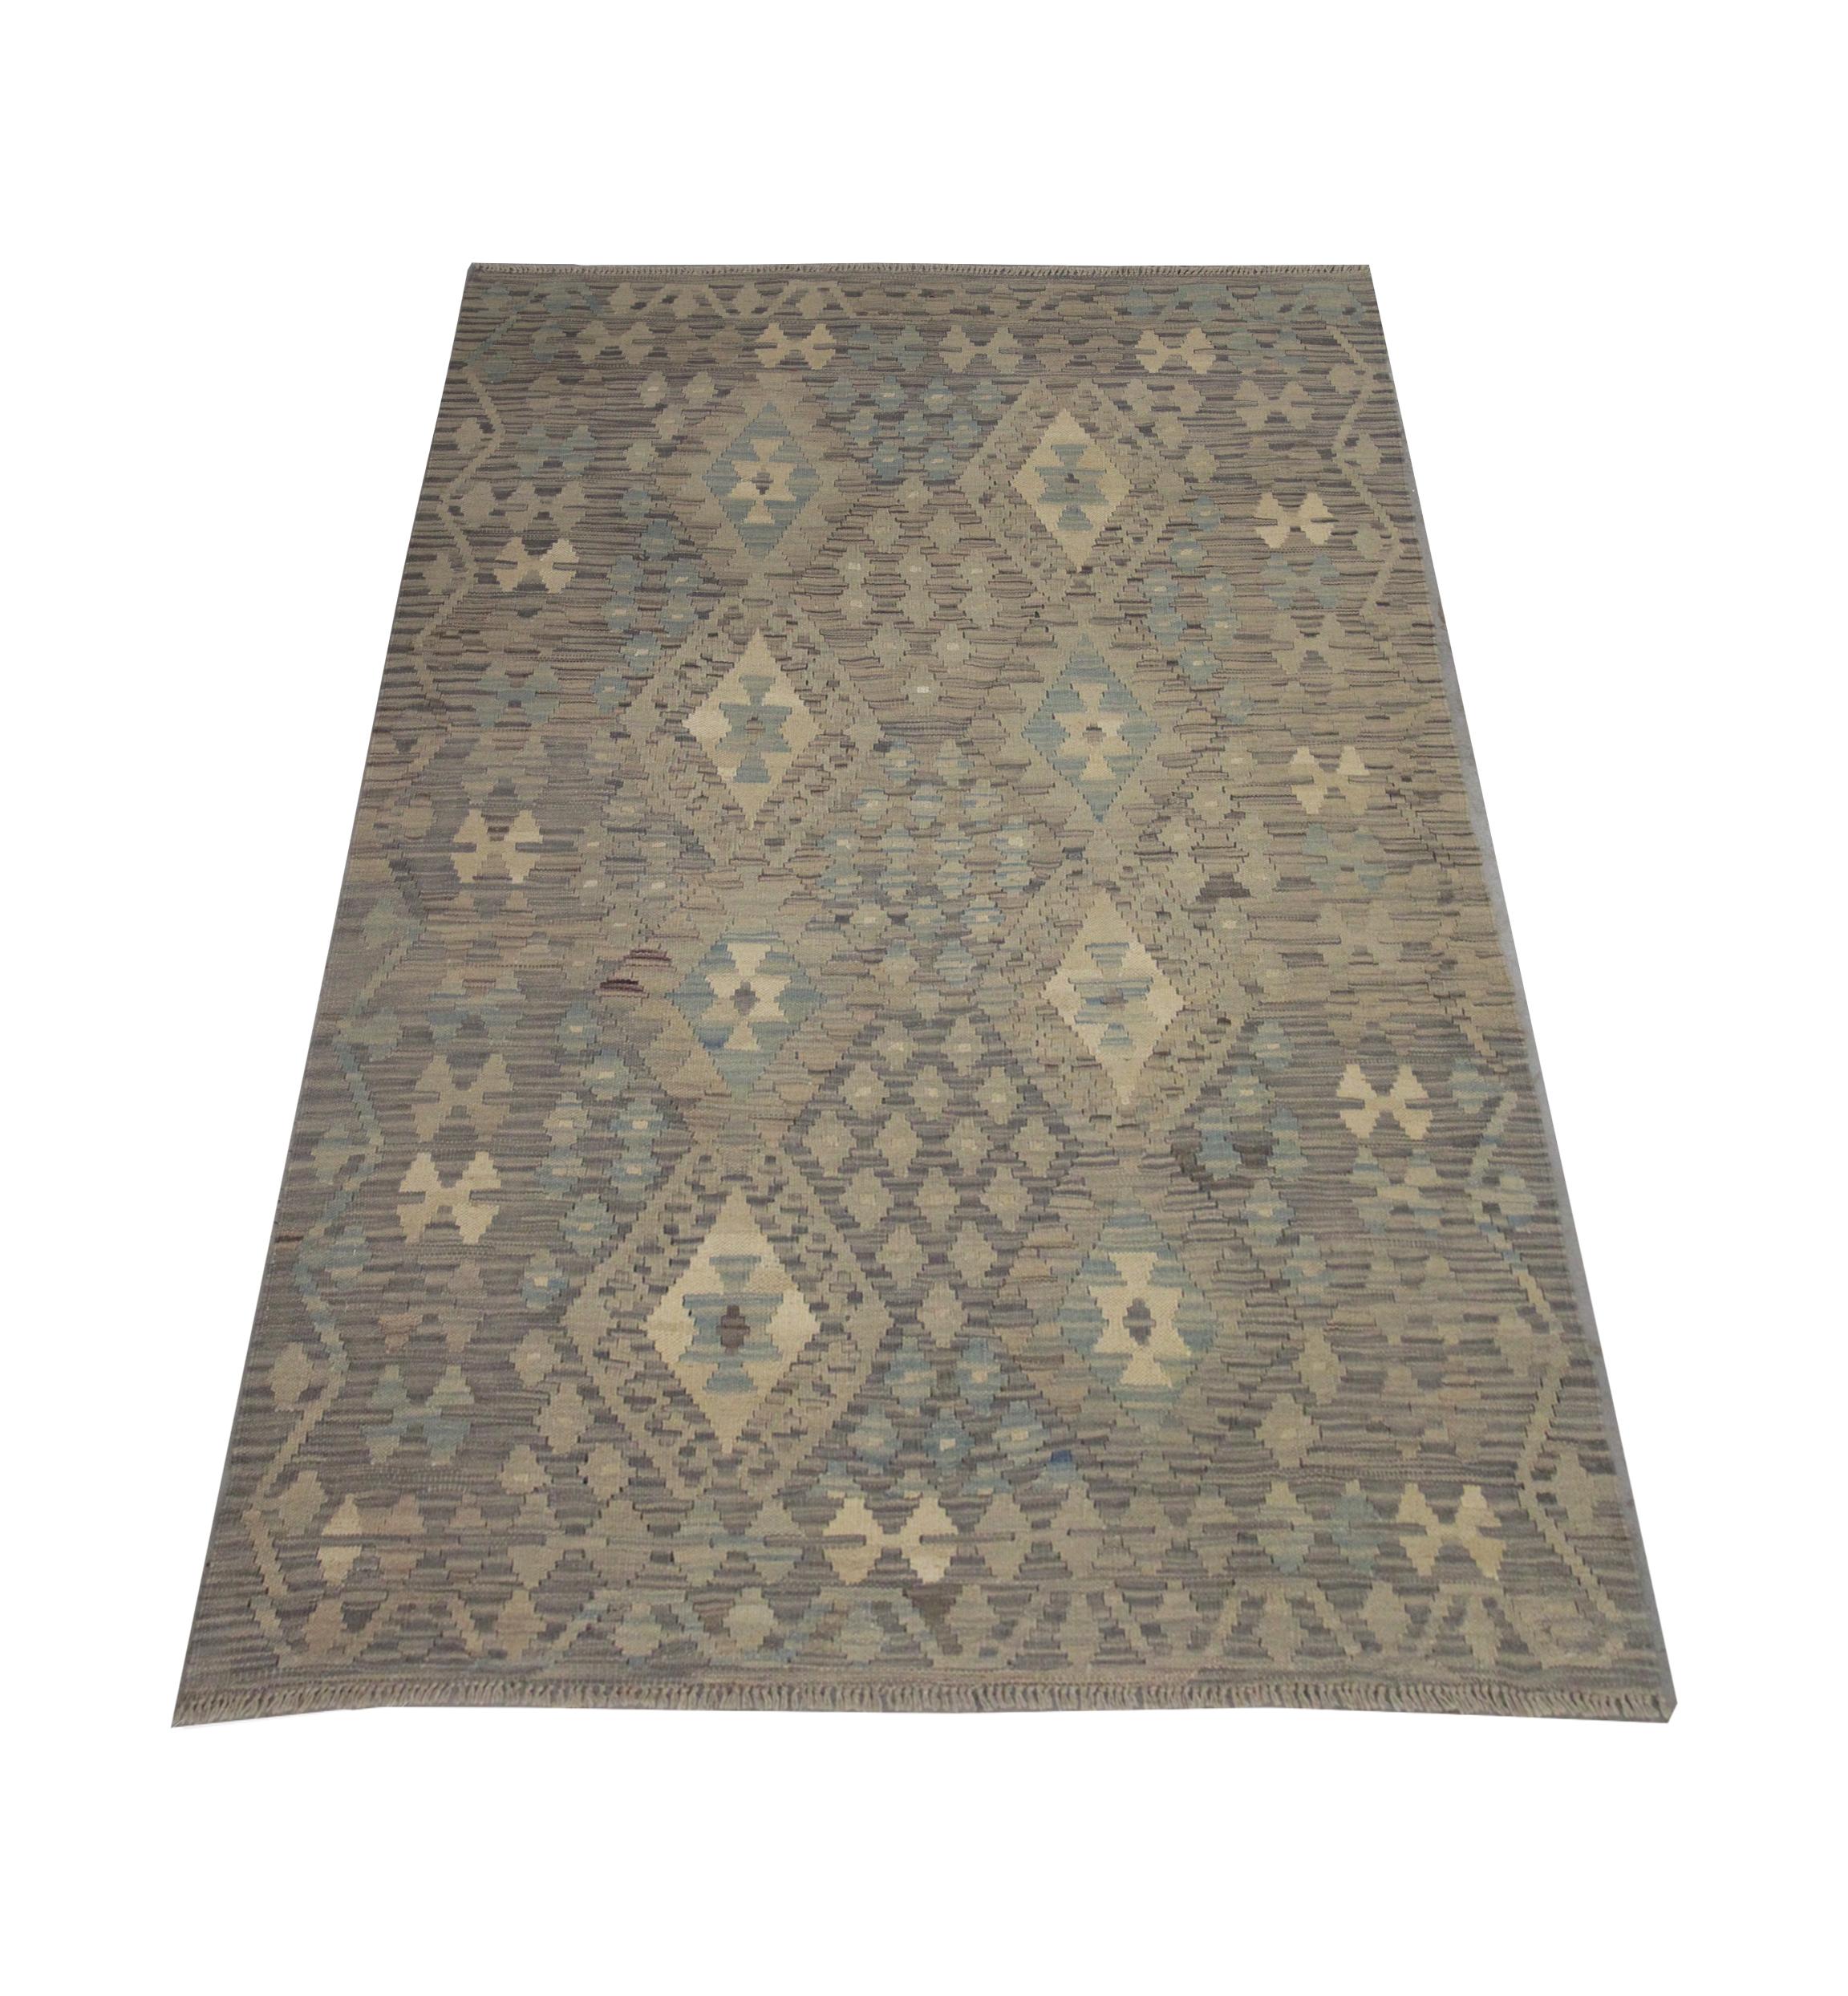 This fine wool area rug is a flatwoven Kilim woven by hand in the early 21st century in Afghanistan. The design features a bold geometric pattern woven with a subtle colour palette including grey, Light Brown, beige and blue. The varying subtle